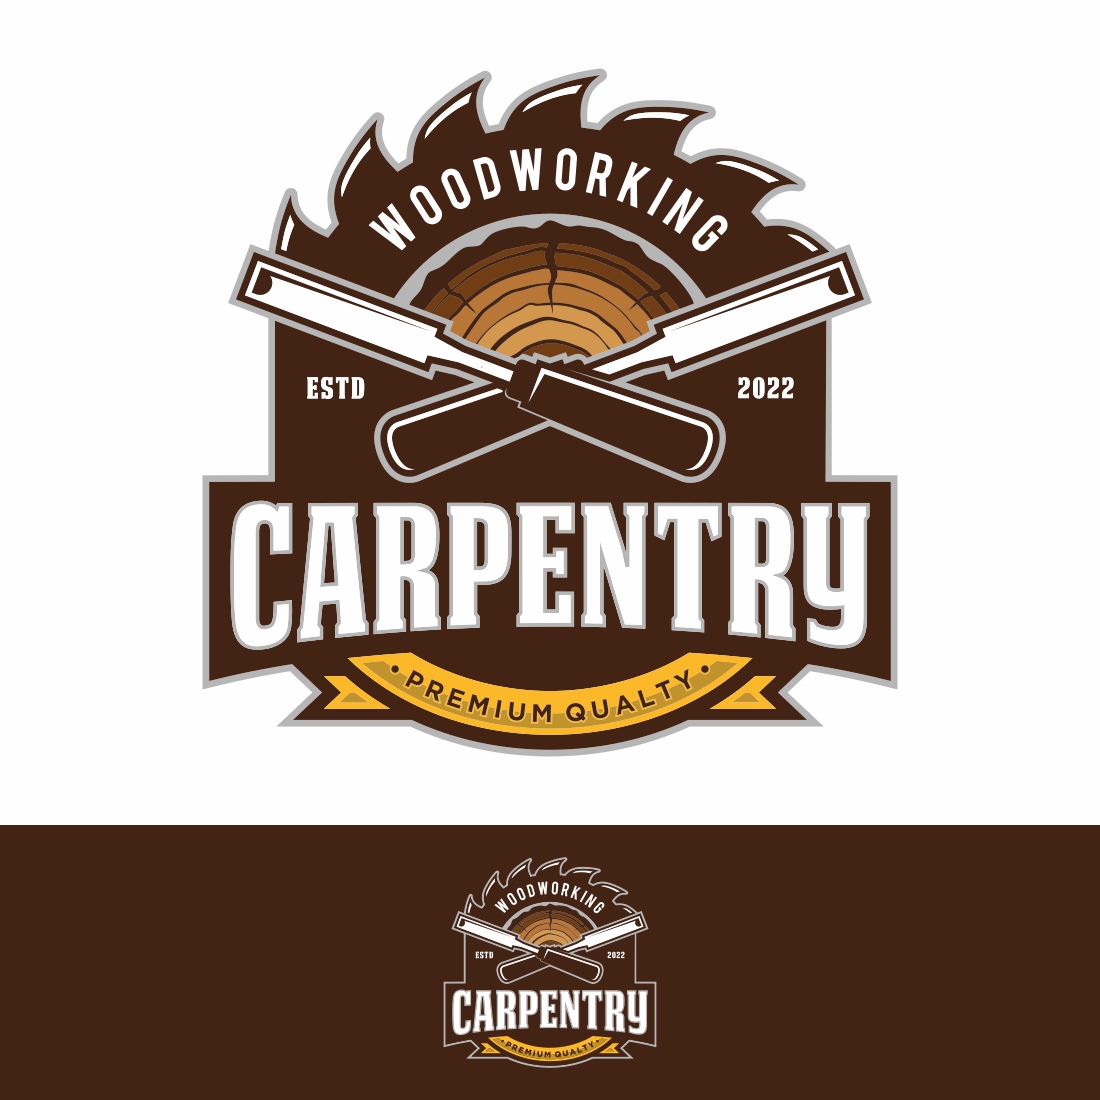 Carpentry Vintage Logo Design Template – Only $6 preview image.